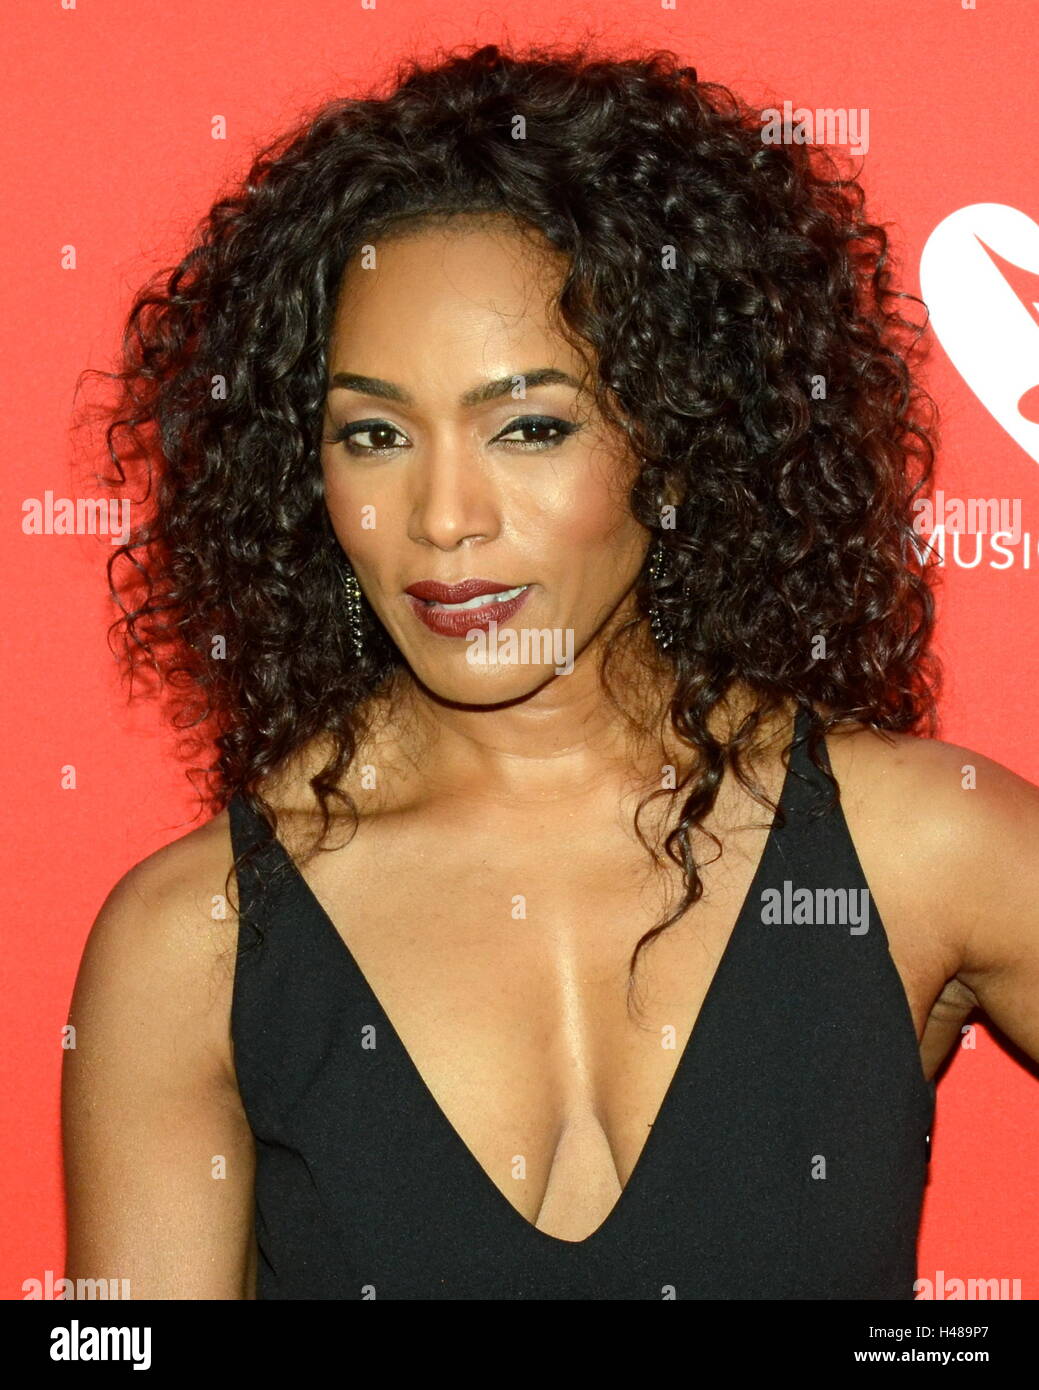 Angela Bassett arrives for the 12th Annual MusiCares MAP Fund Tribute Concert at The Novo by Microsoft on May 19, 2016 in Los Angeles, California. Stock Photo